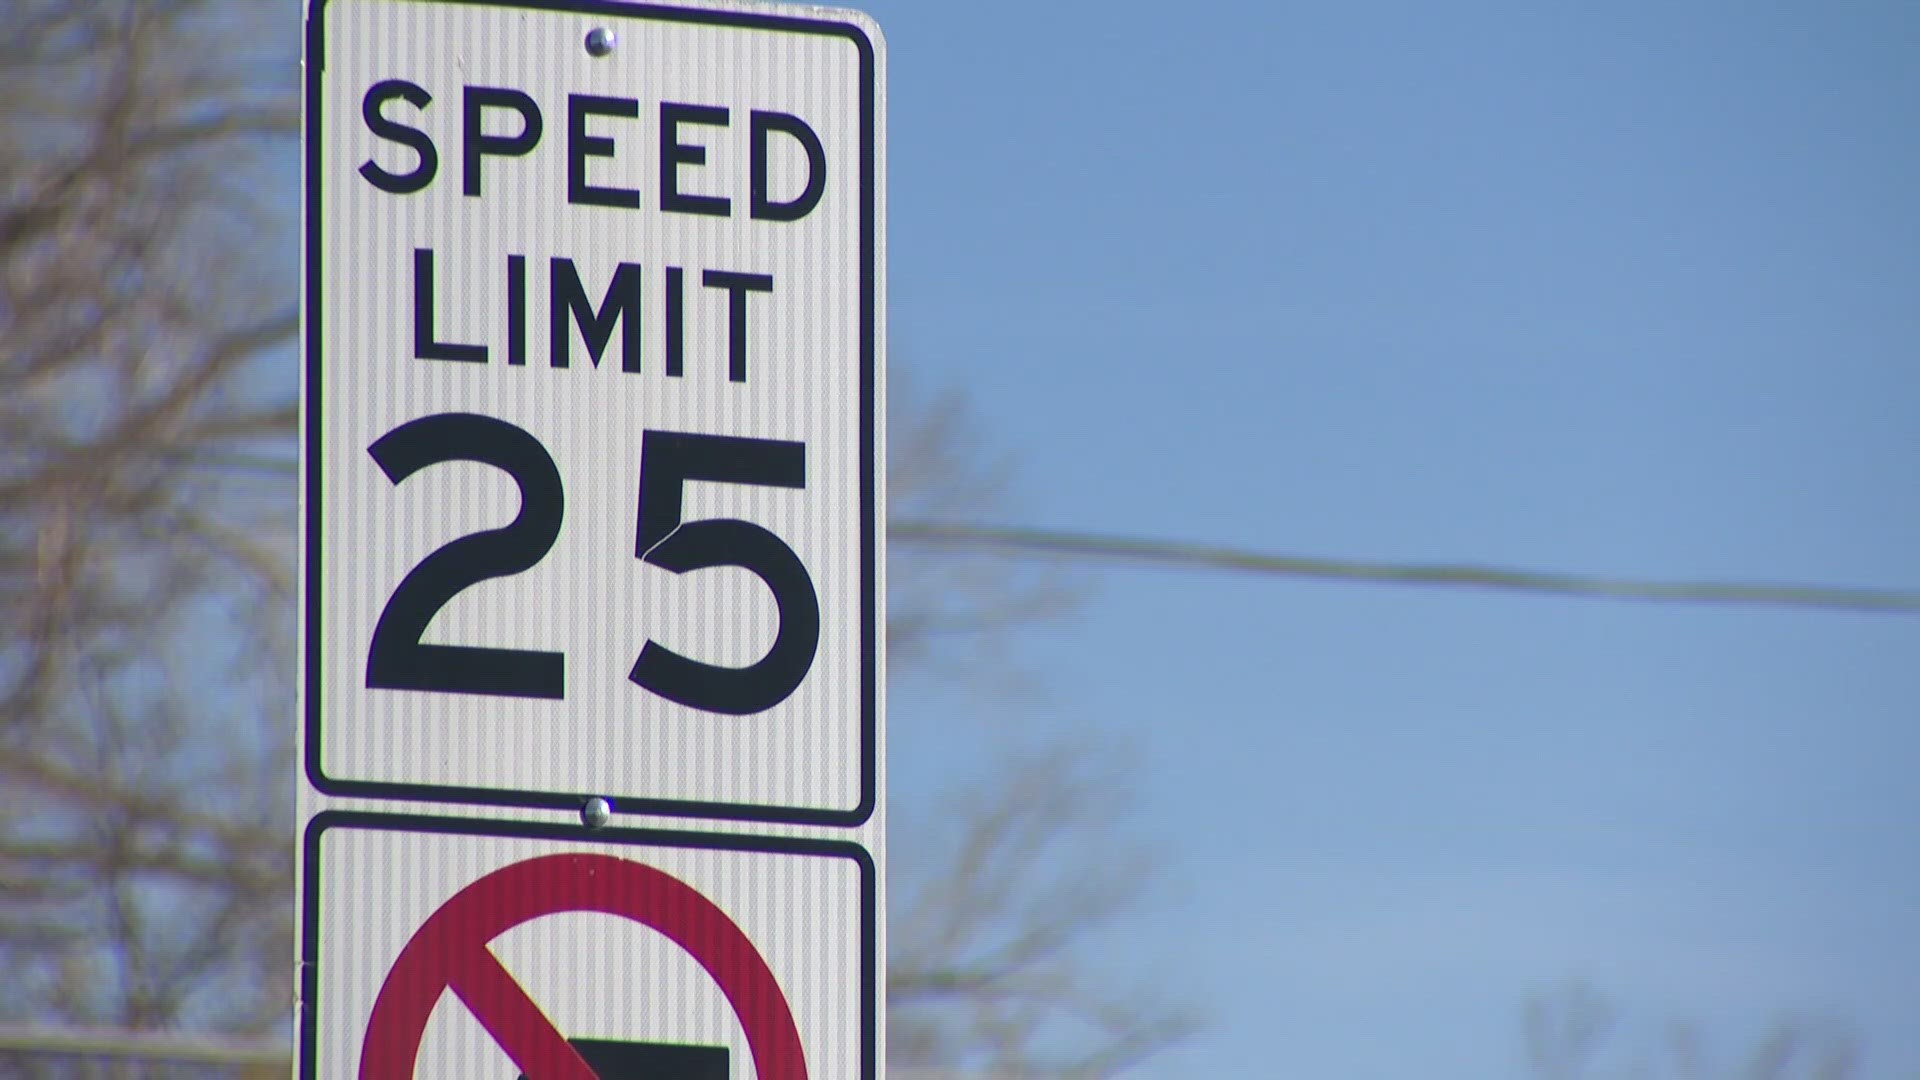 The city said the default speed limit on local streets has been slowed from 25 mph to 20 mph, unless otherwise posted.